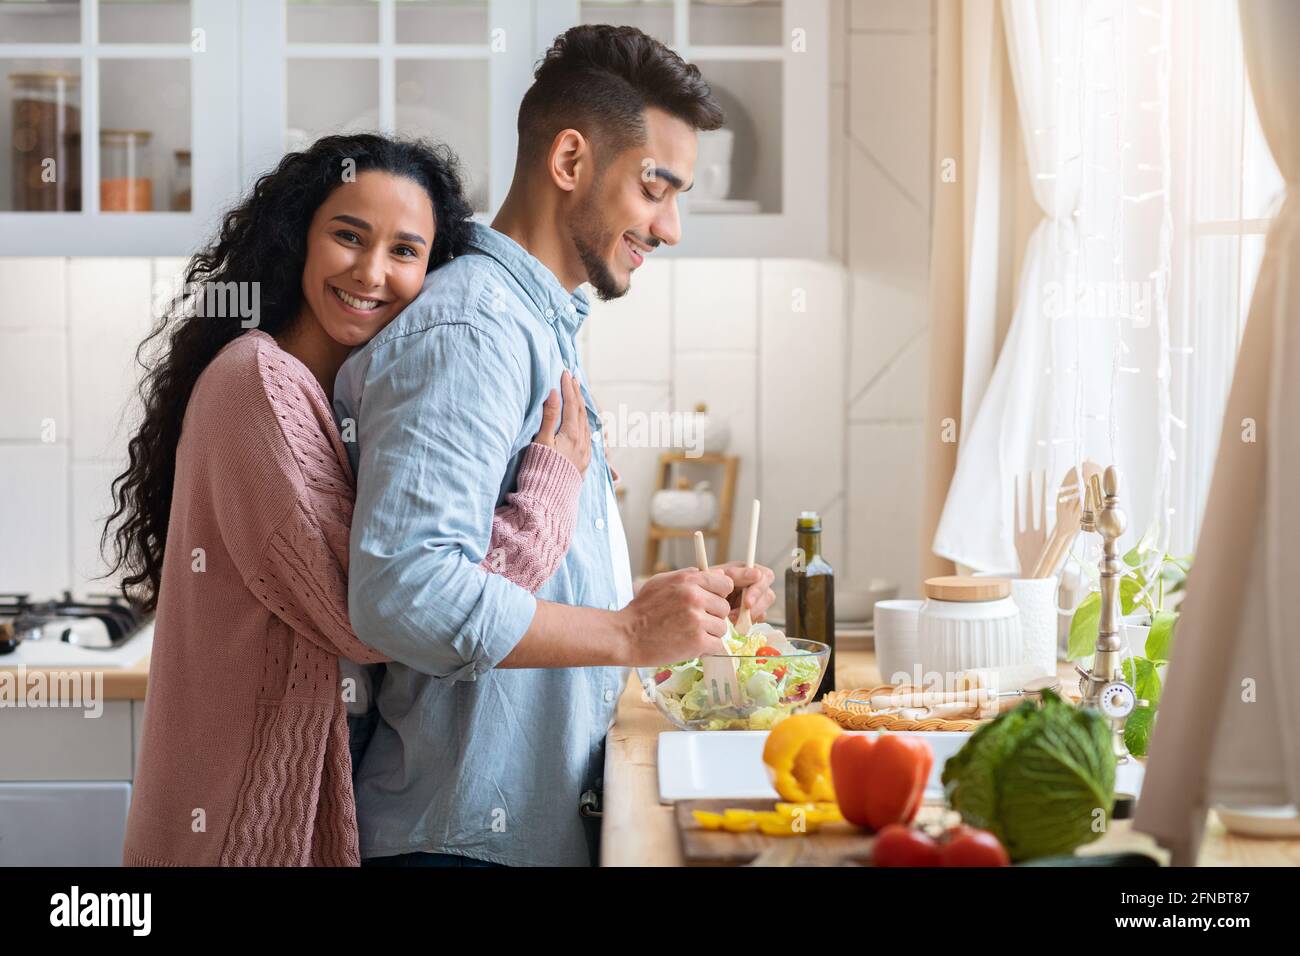 Portrait of loving arab wife embracing husband while cooking together in kitchen Stock Photo